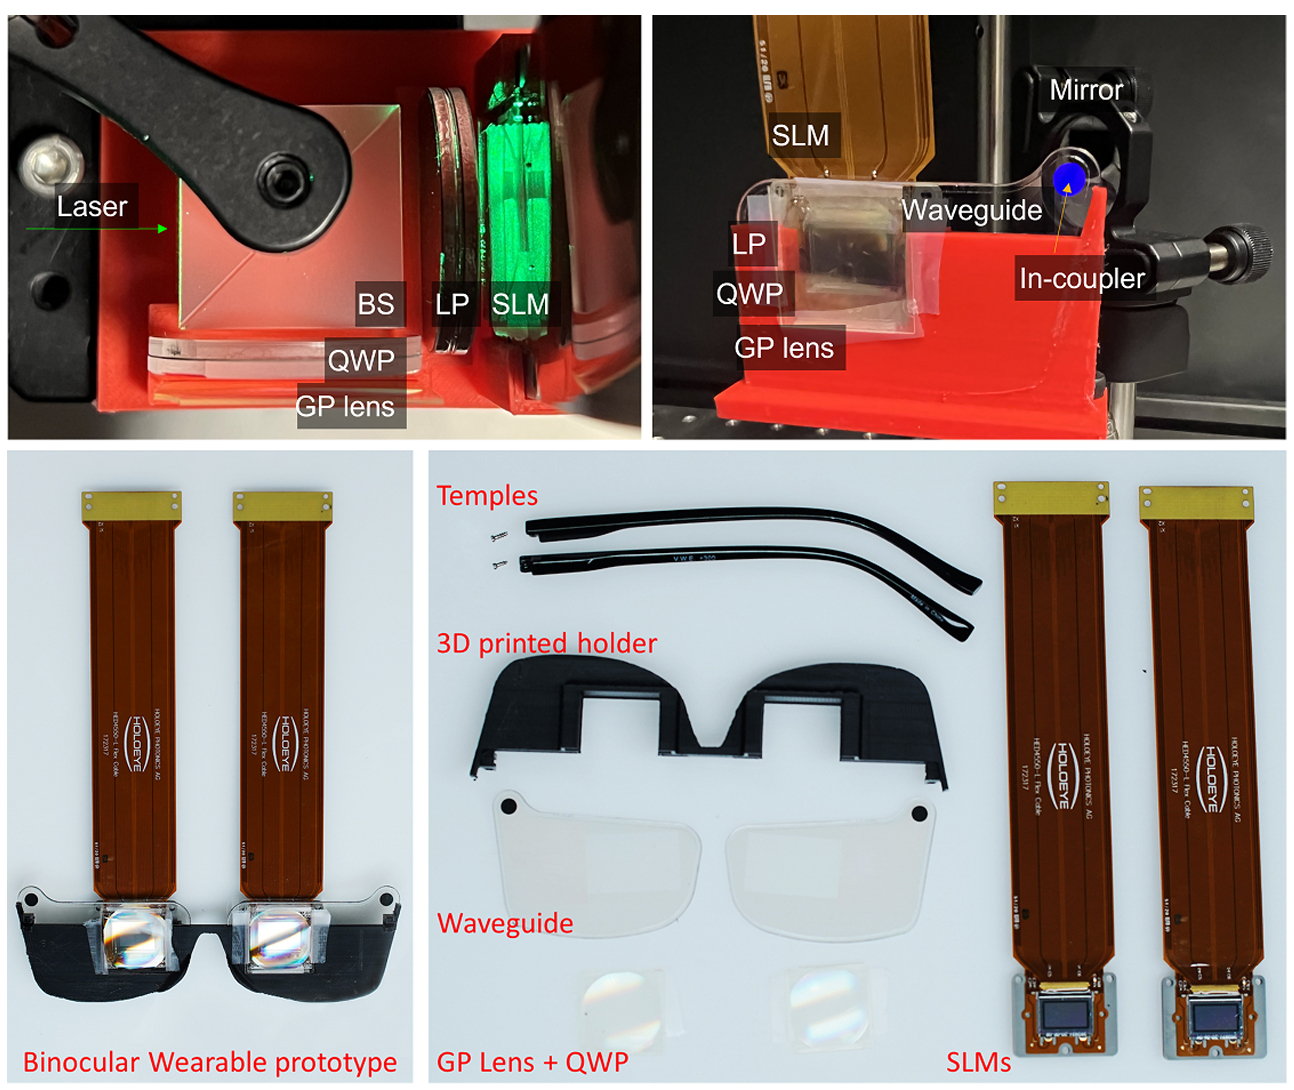 Nvidia researchers prototype VR glasses with parts labeled